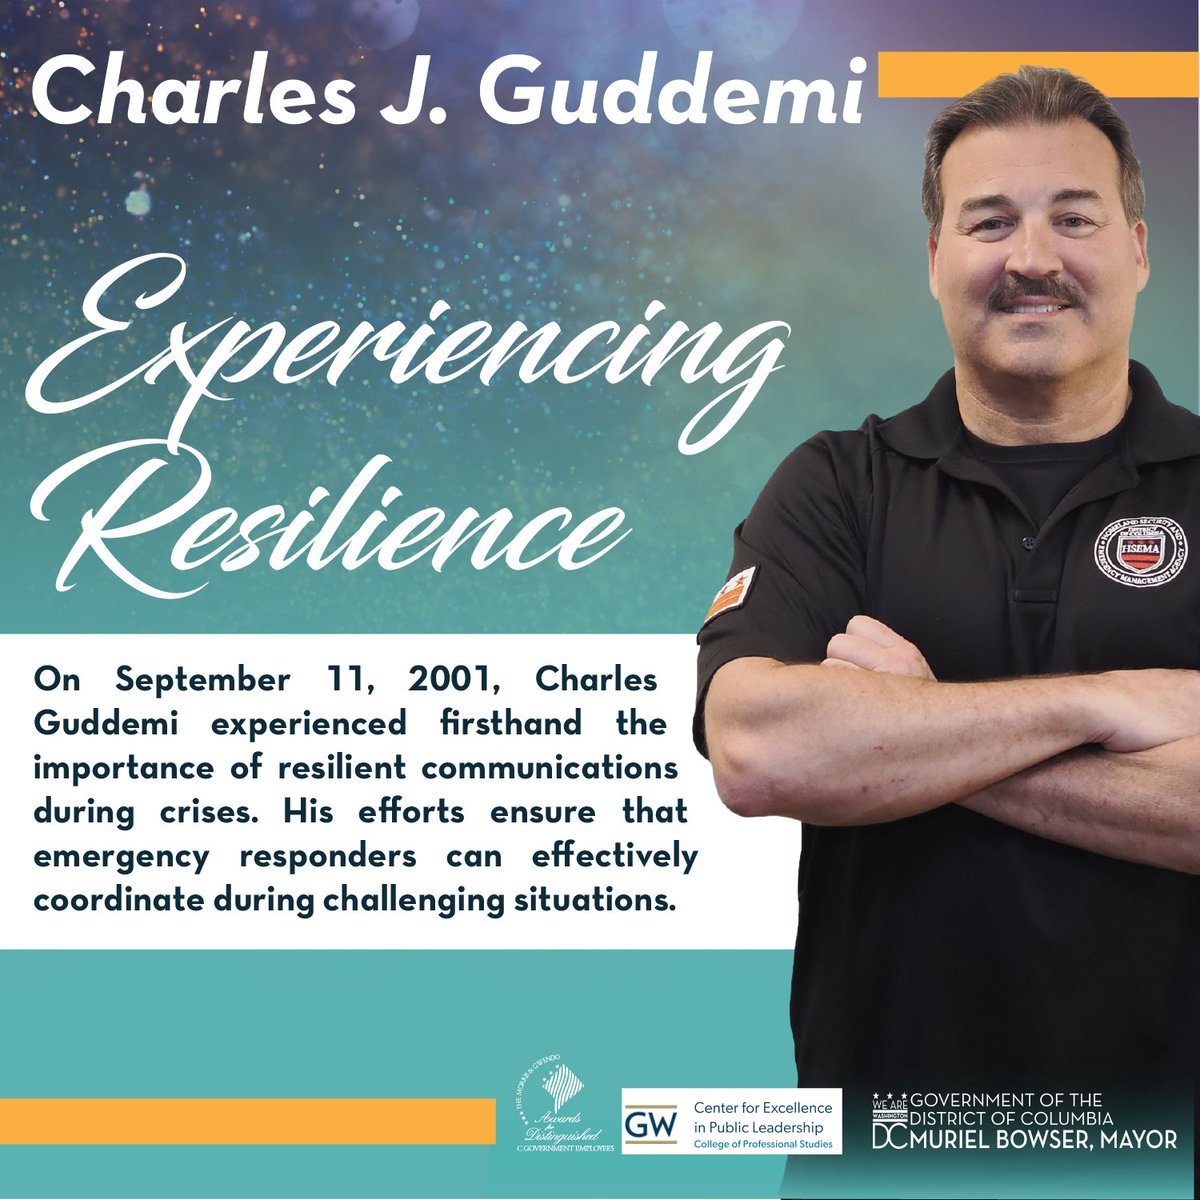 Join us in celebrating Charles J. Guddemi, a 21st Cafritz Awards winner & a true leader in emergency communications. His dedication & innovative approaches ensure the safety & well-being of communities worldwide. 🌟#CafritzAwards #EmergencyCommunications @DC_HSEMA